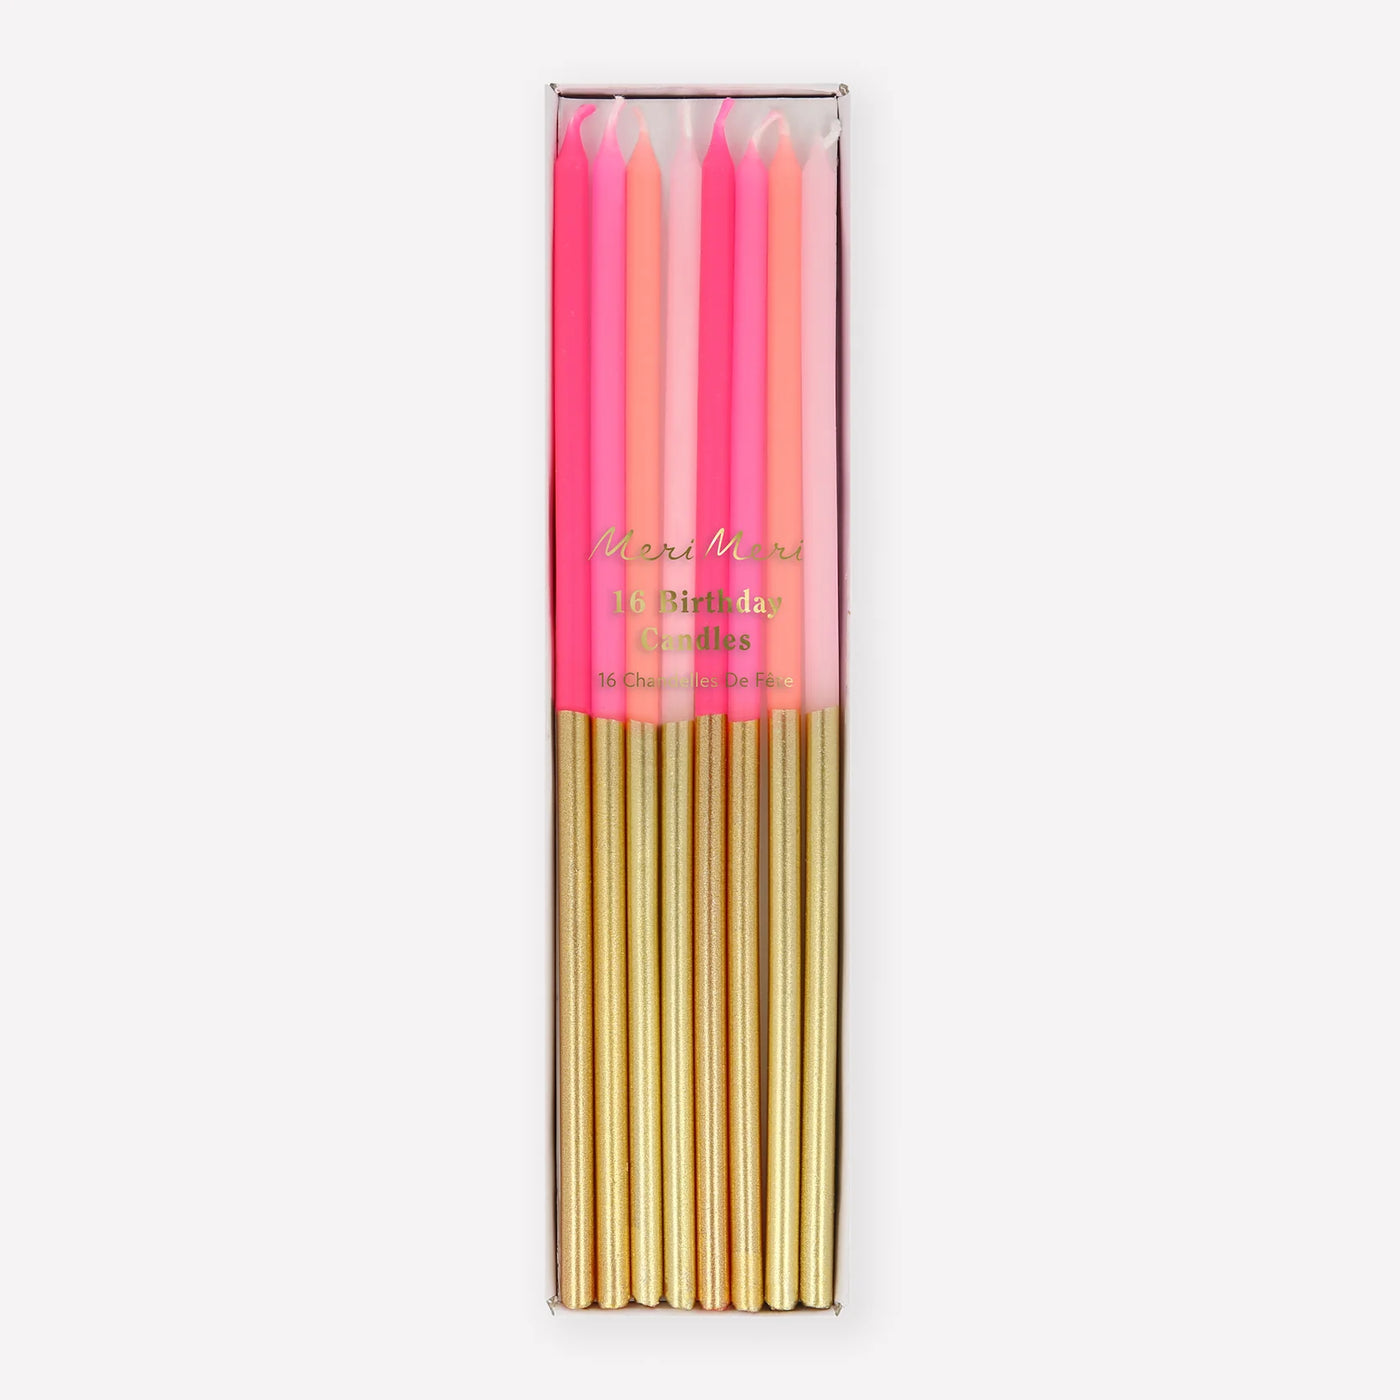 Gold Dipped Pink Candles